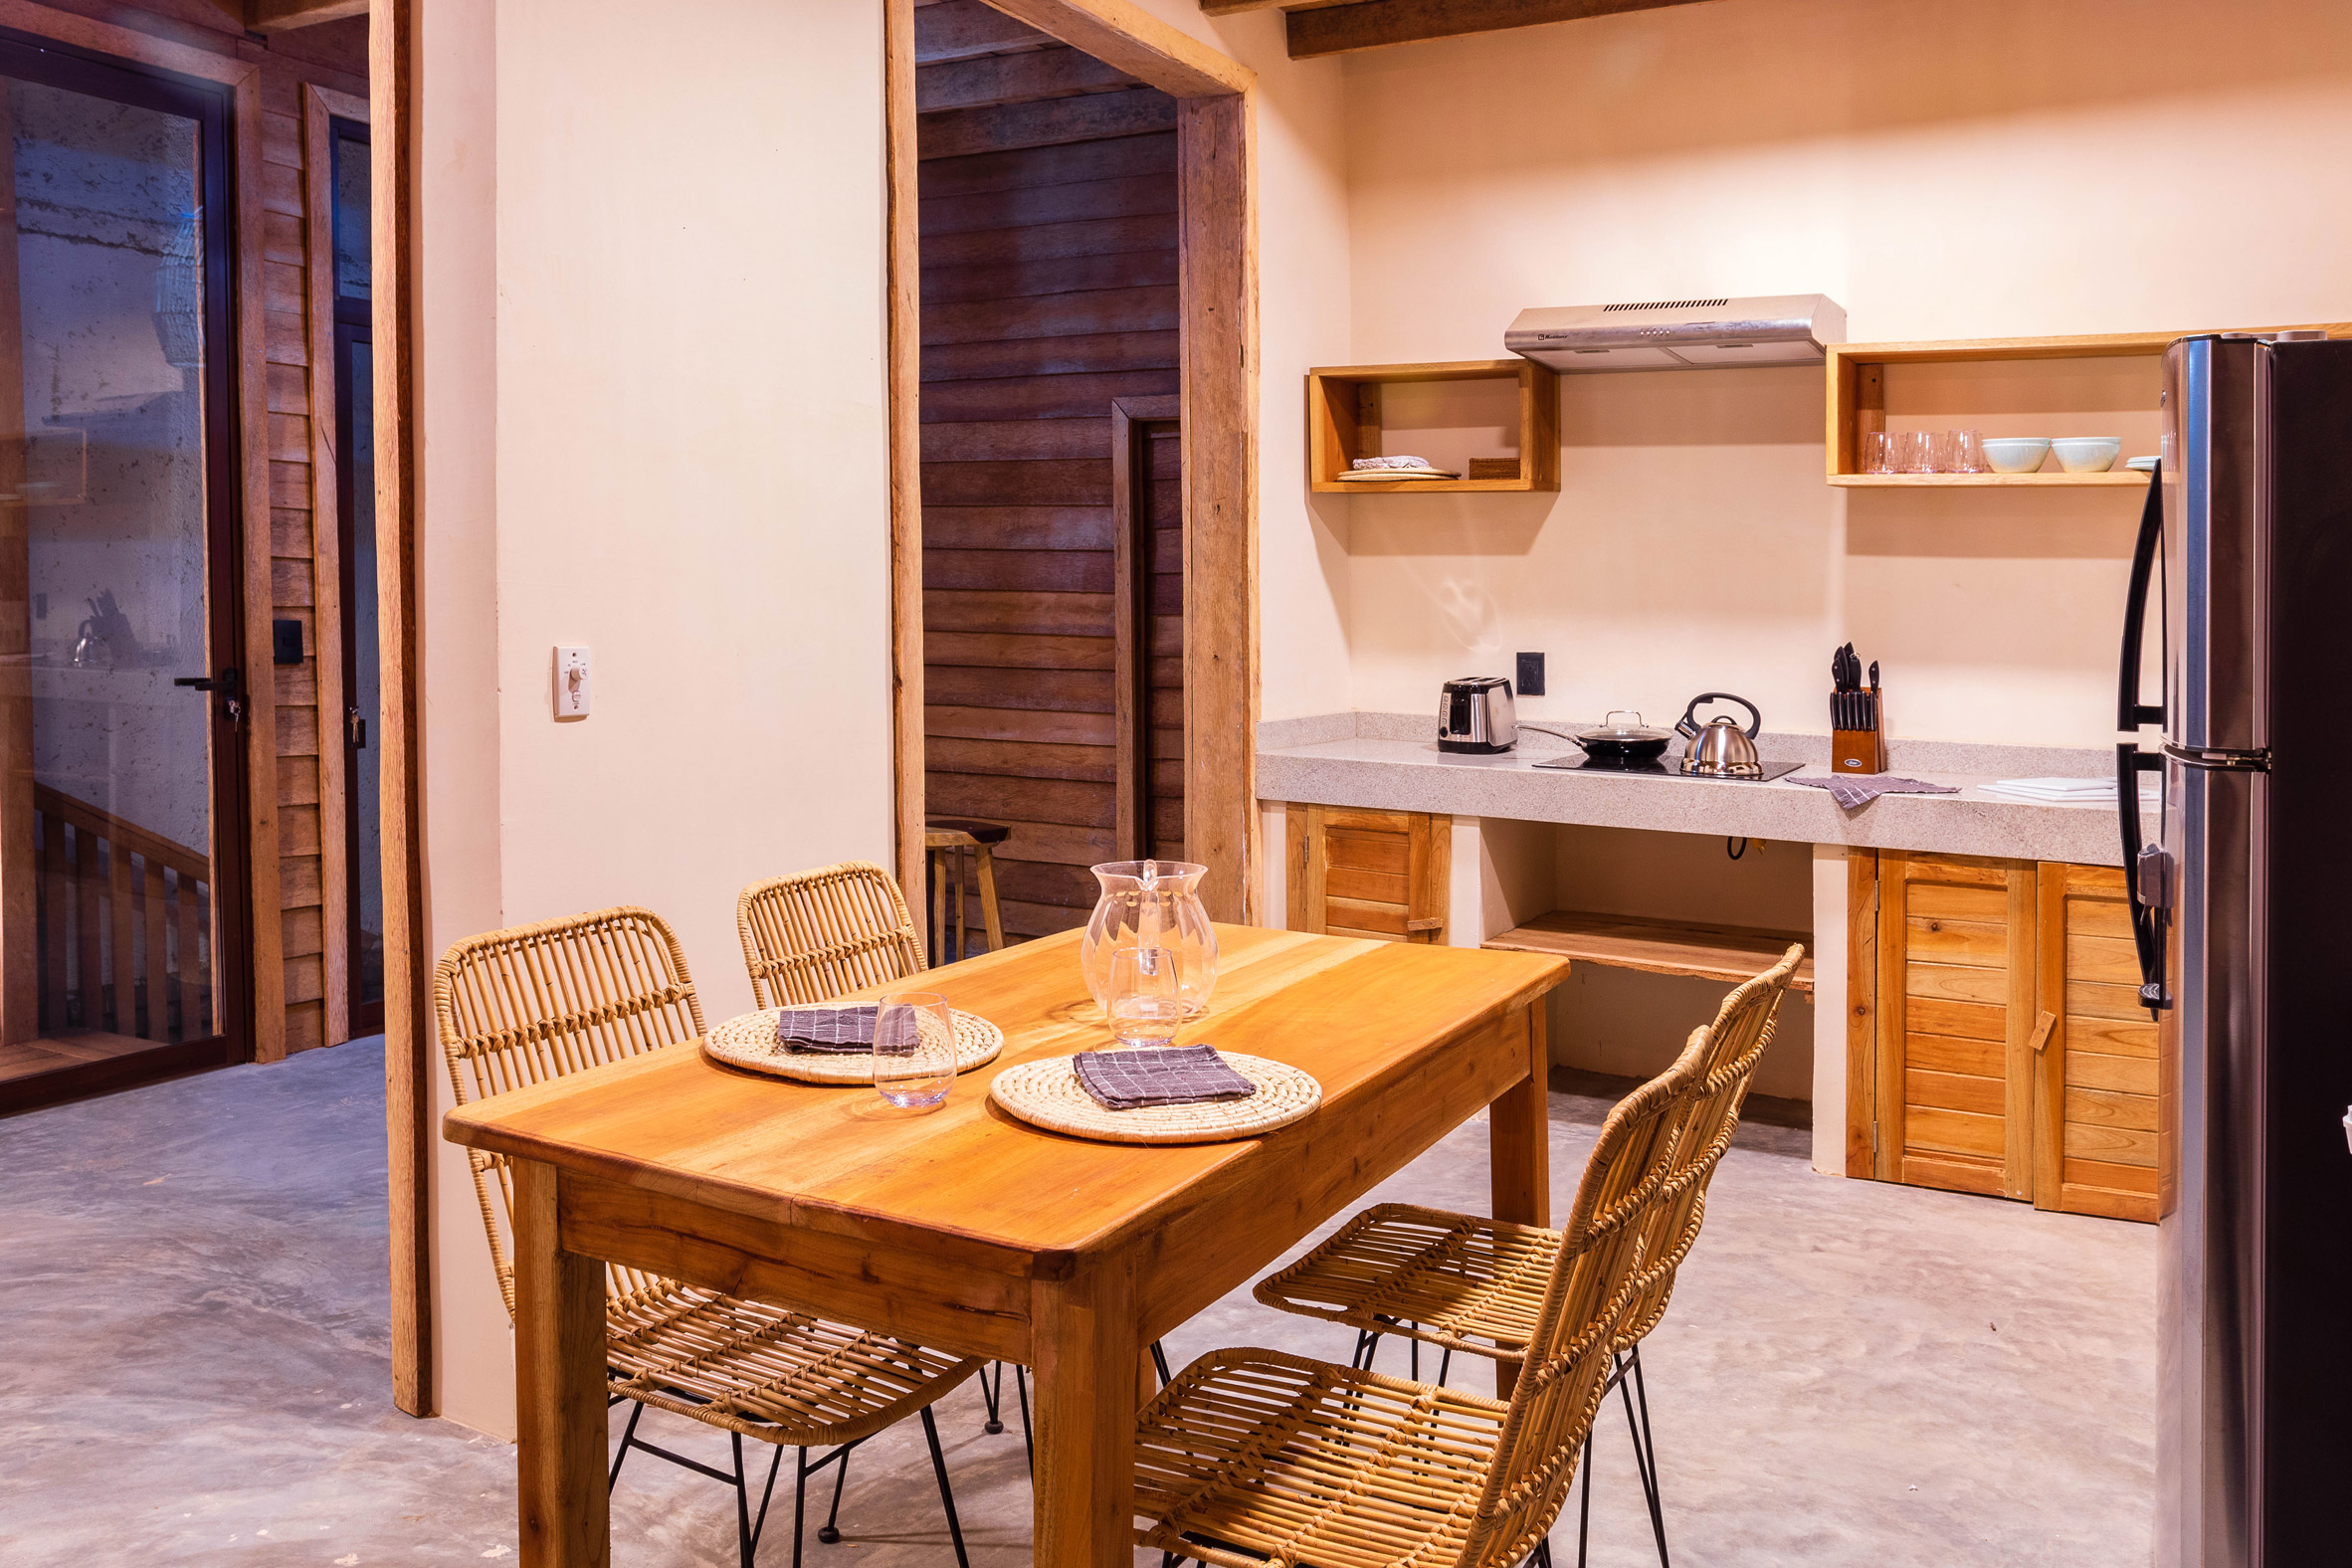 Kitchen finished with chukum and white soil aggregate and furnished with timber dining table